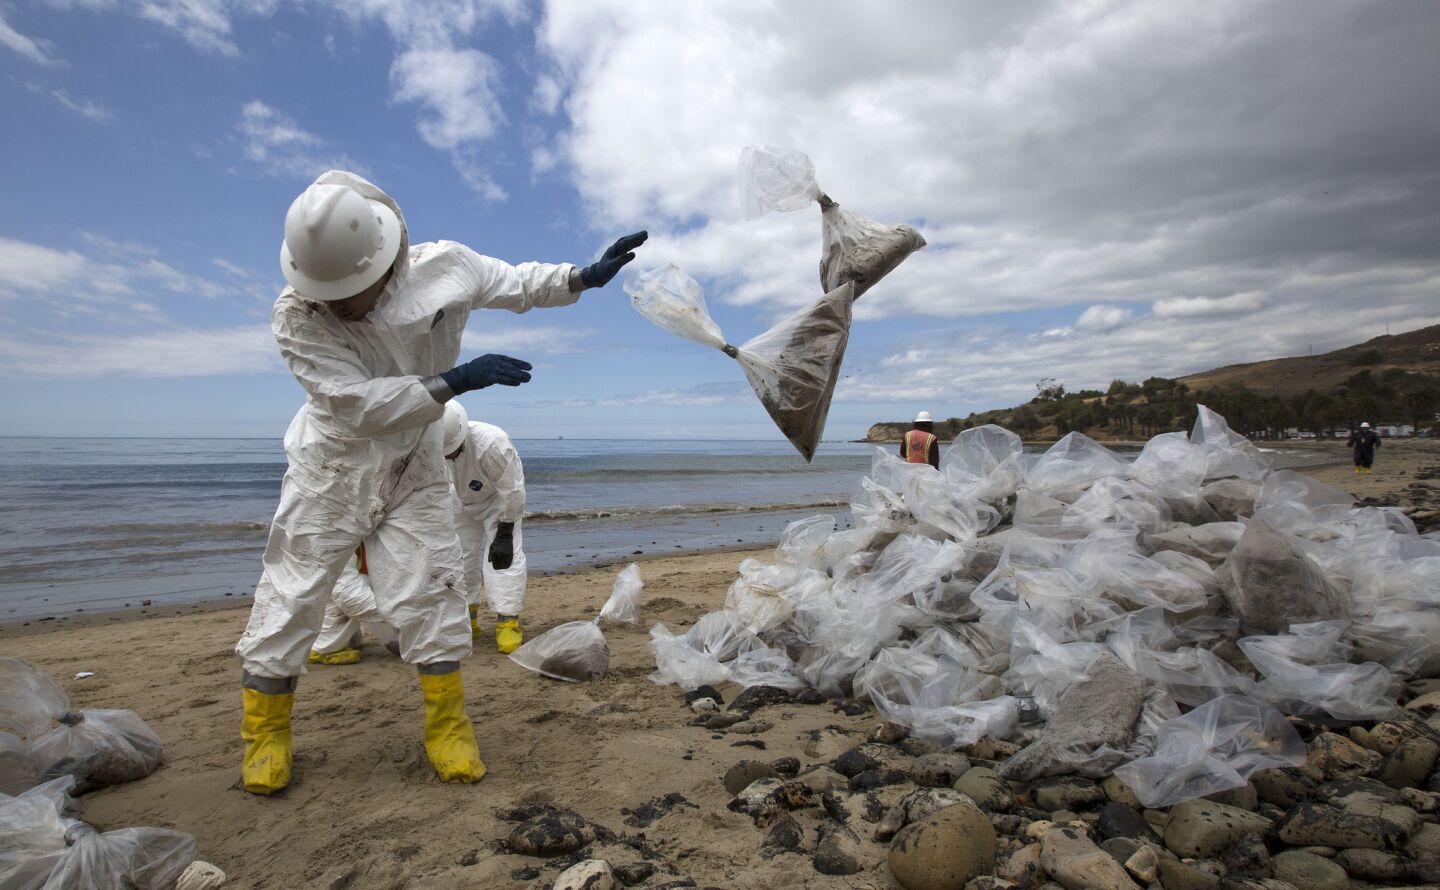 Patriot Environmental Services employees pile bags of oil-contaminated sand on the shoreline at Refugio State Beach near Santa Barbara.